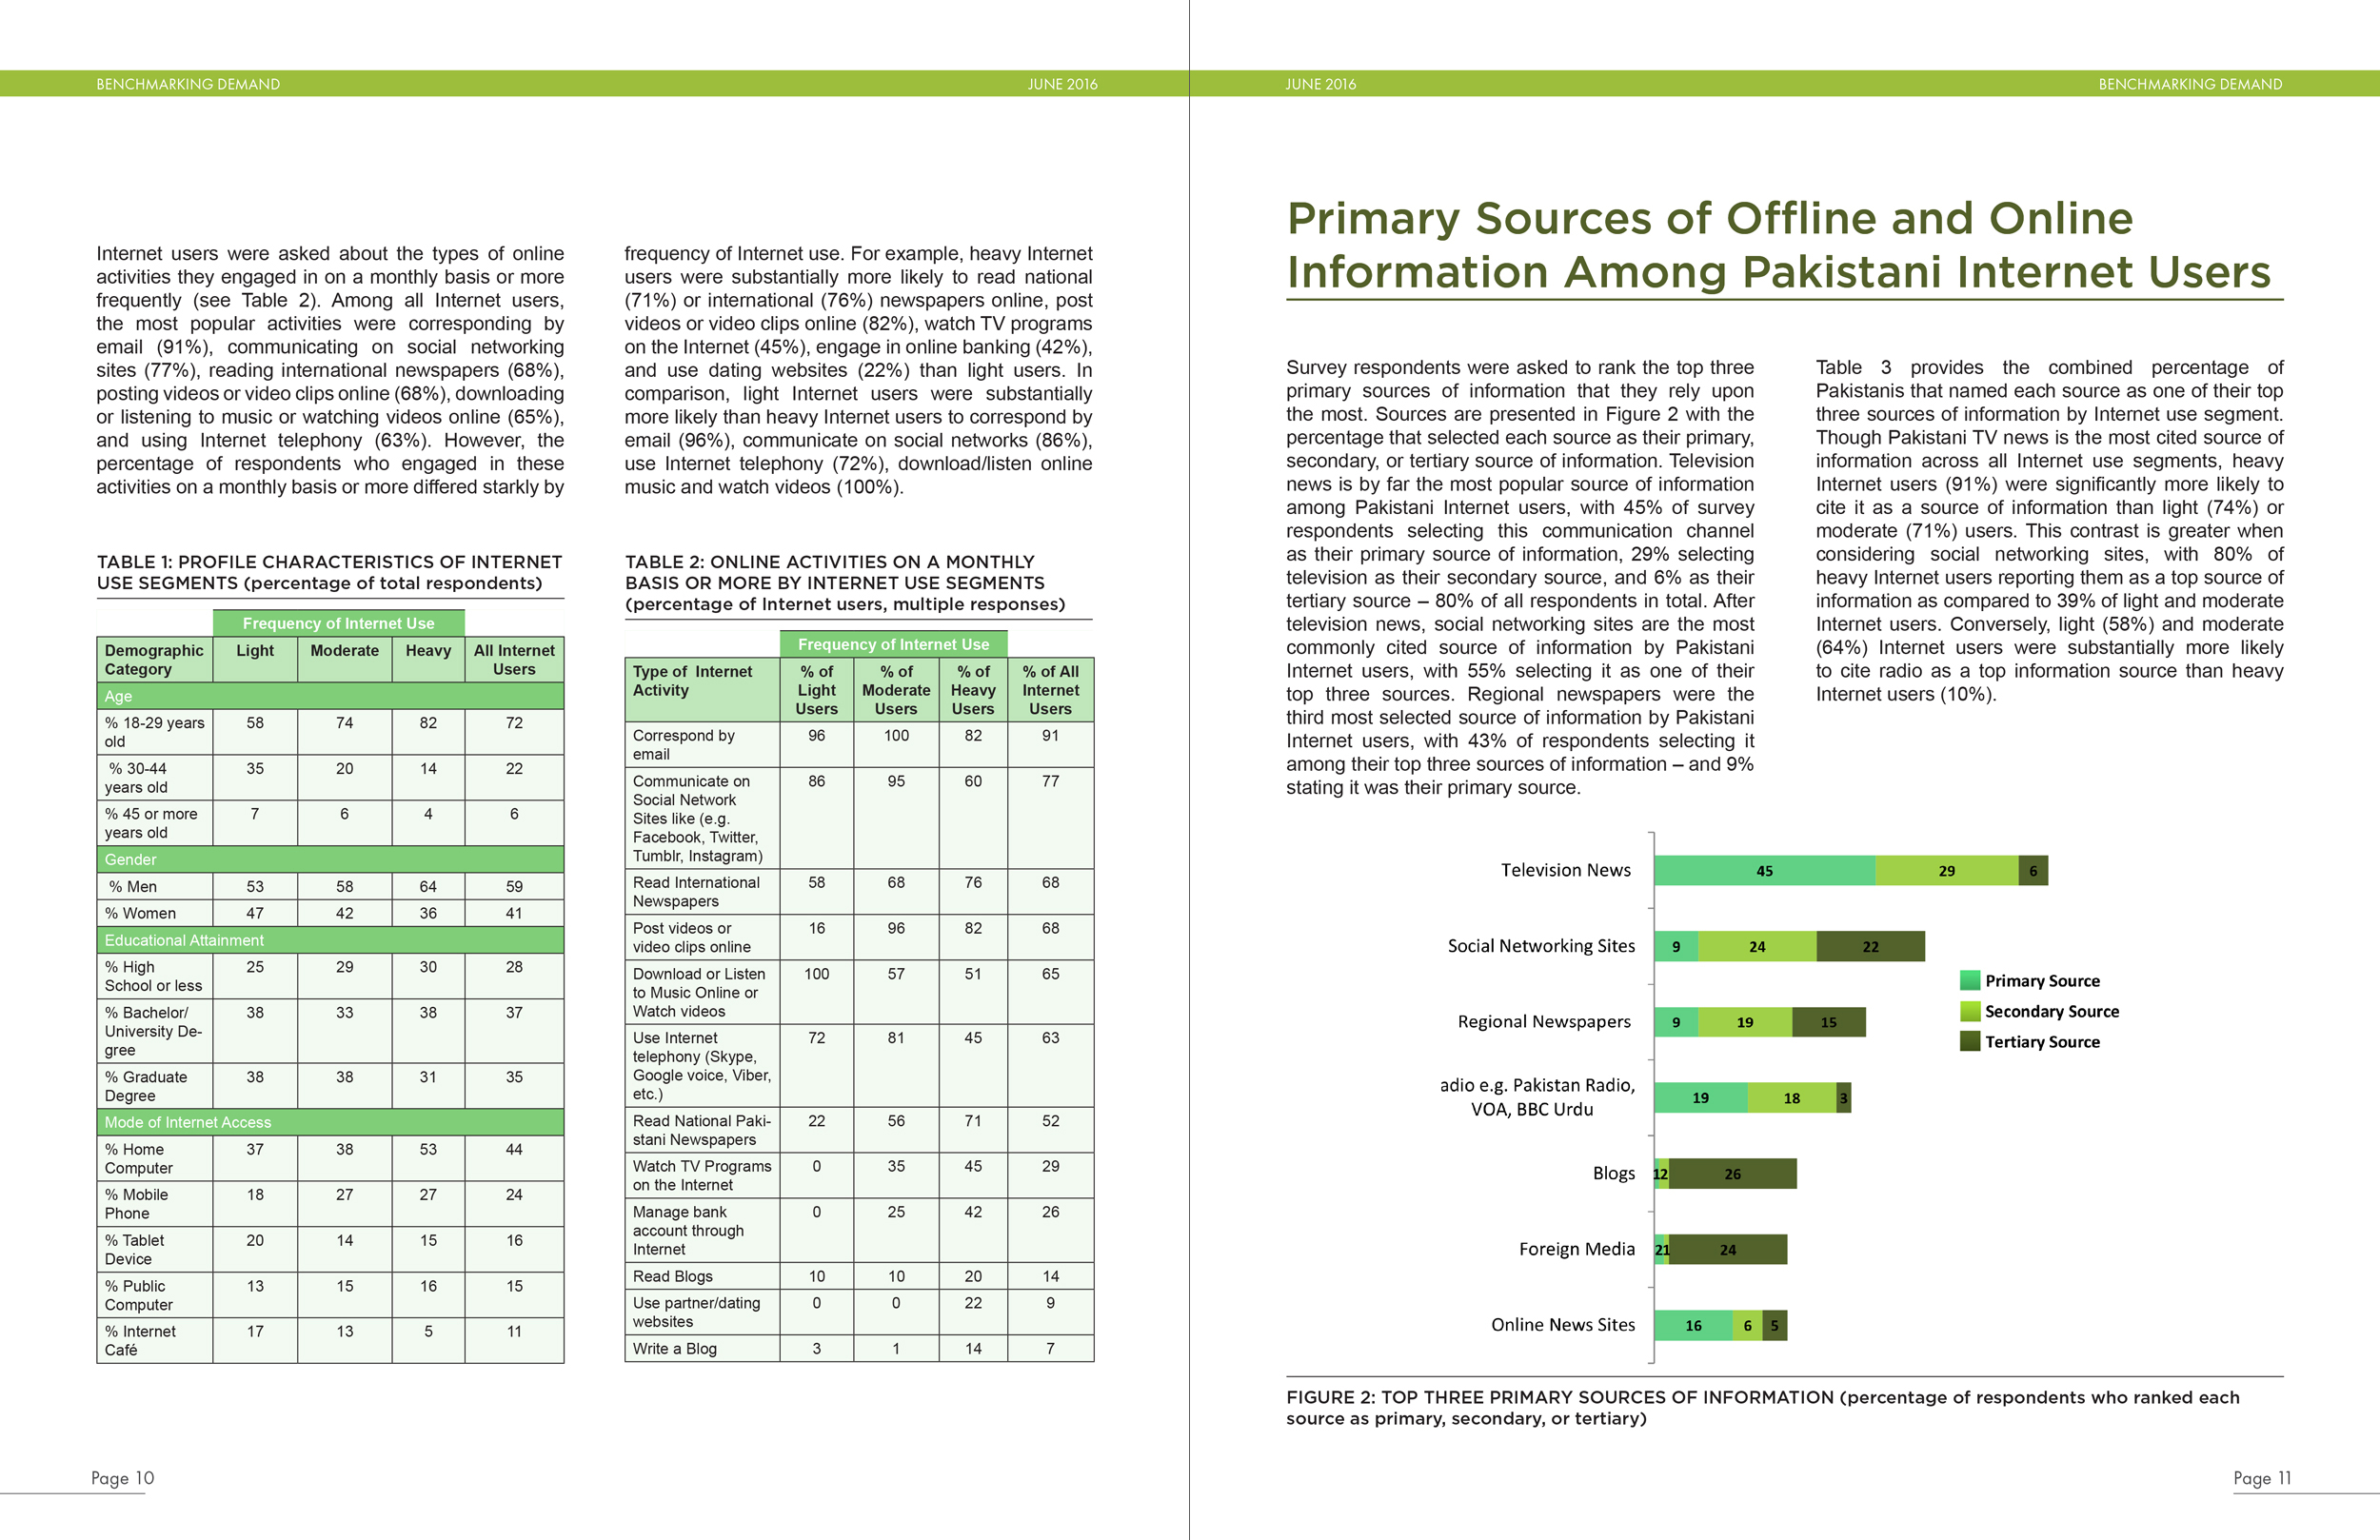 Report interior pages (Center for Global Communication Studies, University of Pennsylvania)